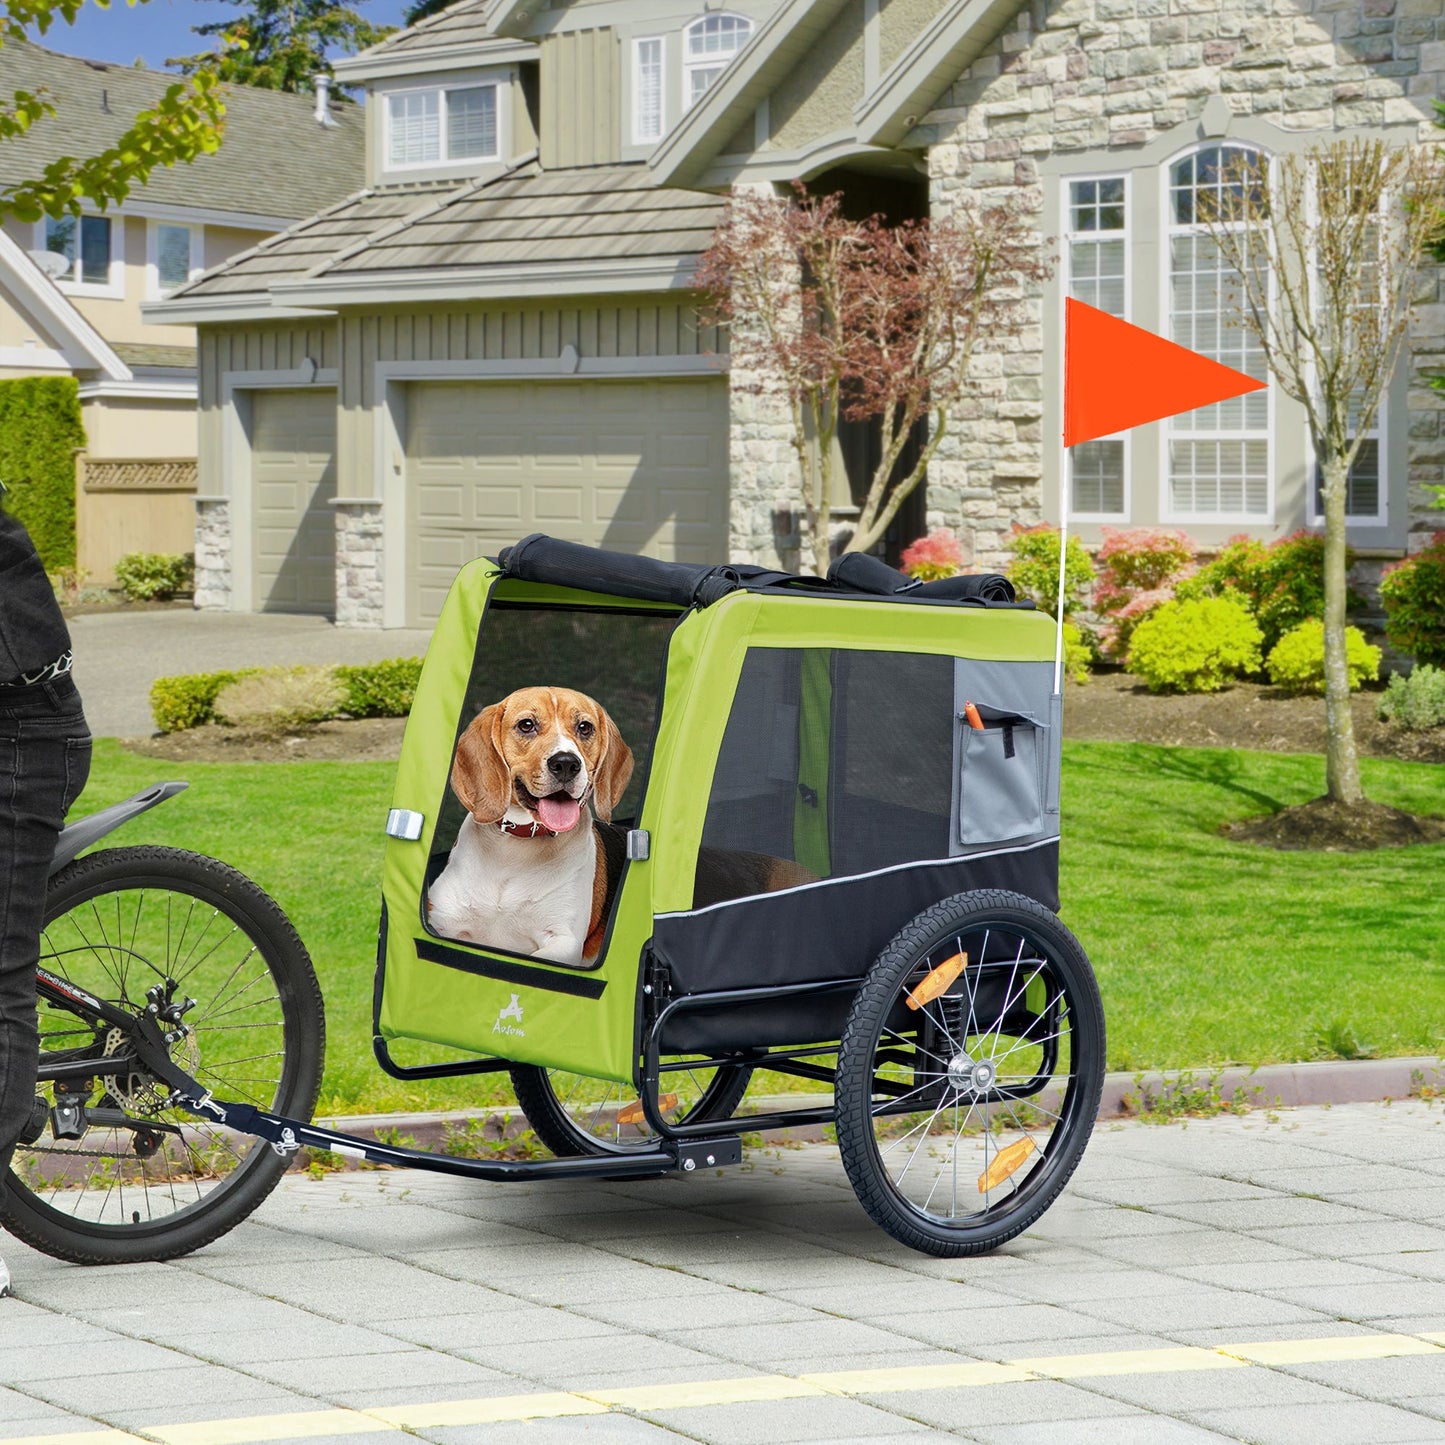 Pet Supplies-Dog Bike Trailer with Suspension System, Pet Bicycle Cart Wagon Carrier for Medium Dogs with Quick Release Wheels, Pockets & Safey Leash, Green - Outdoor Style Company